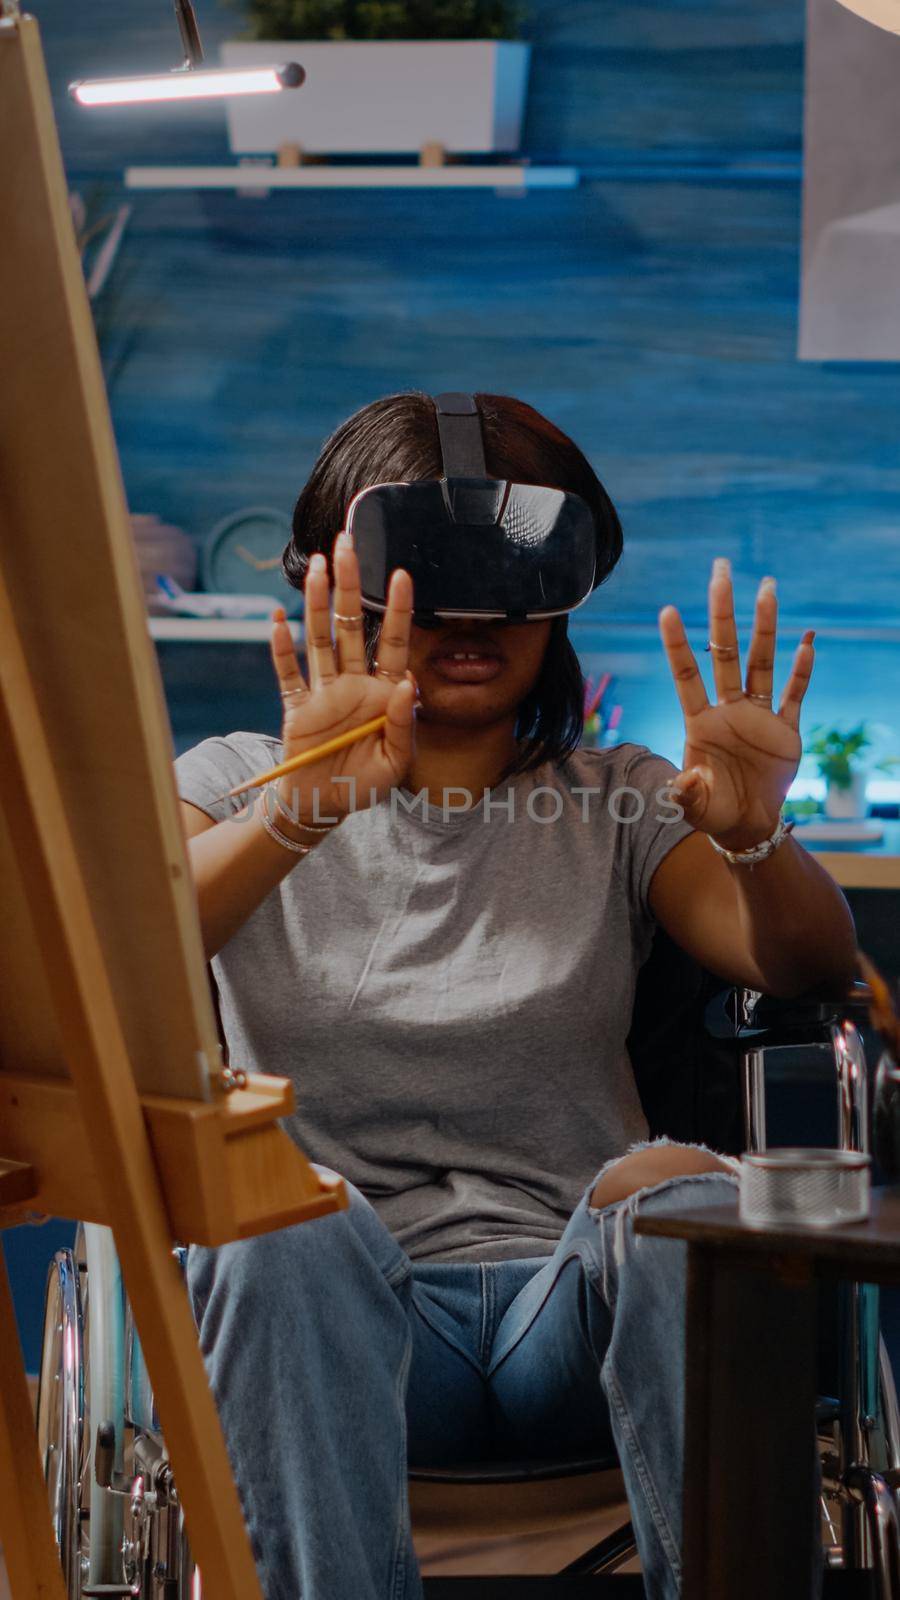 Black artist woman using vr glasses for art project by DCStudio